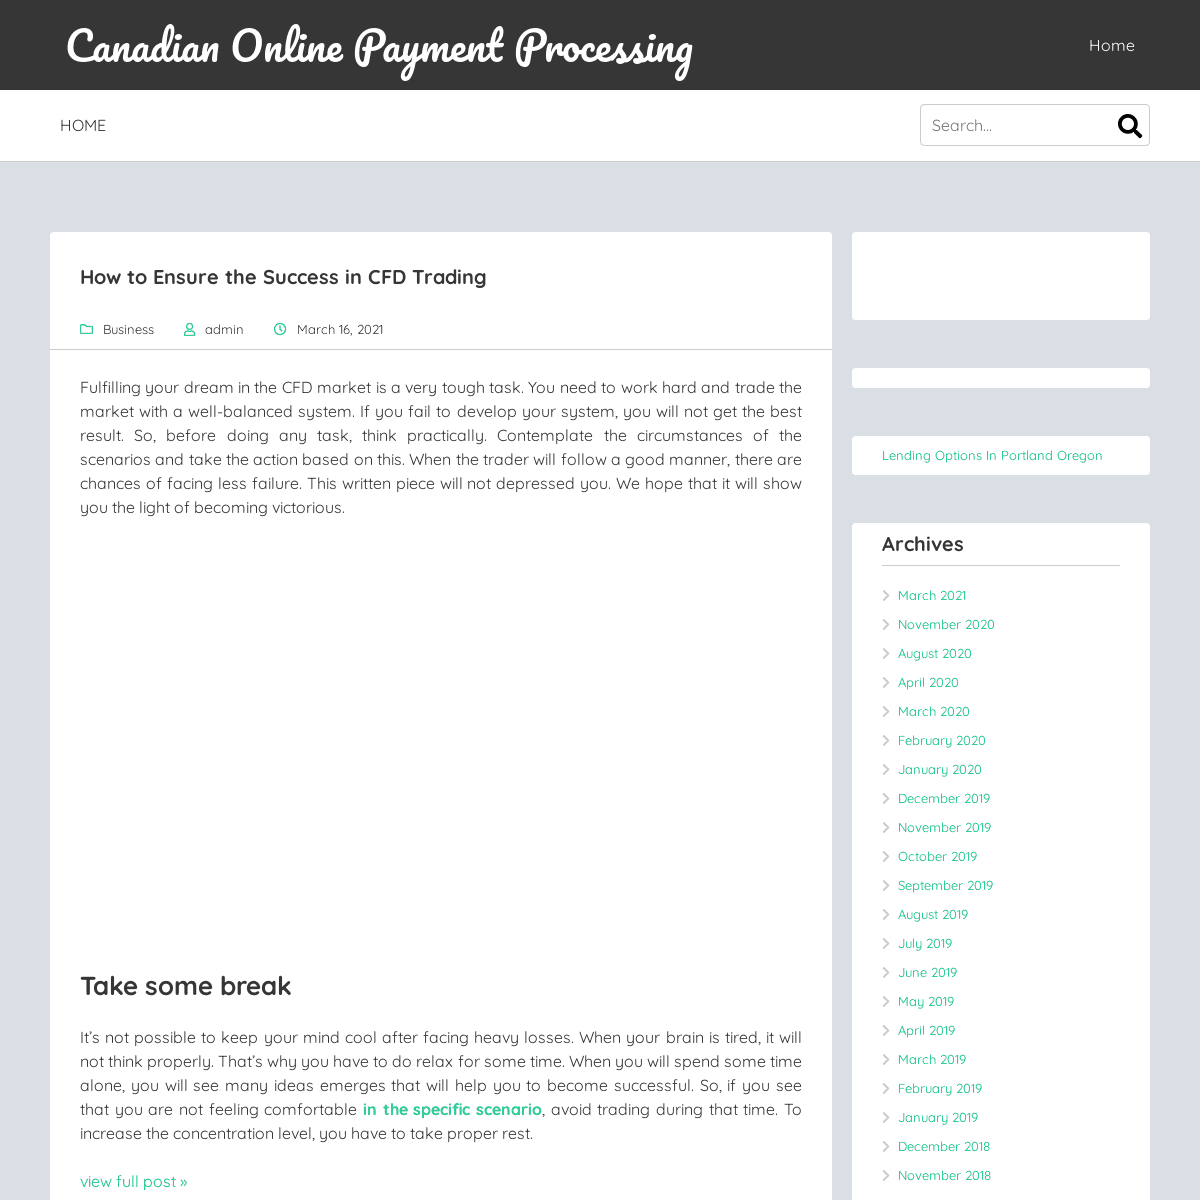 A complete backup of https://canadianonlinexyz.com